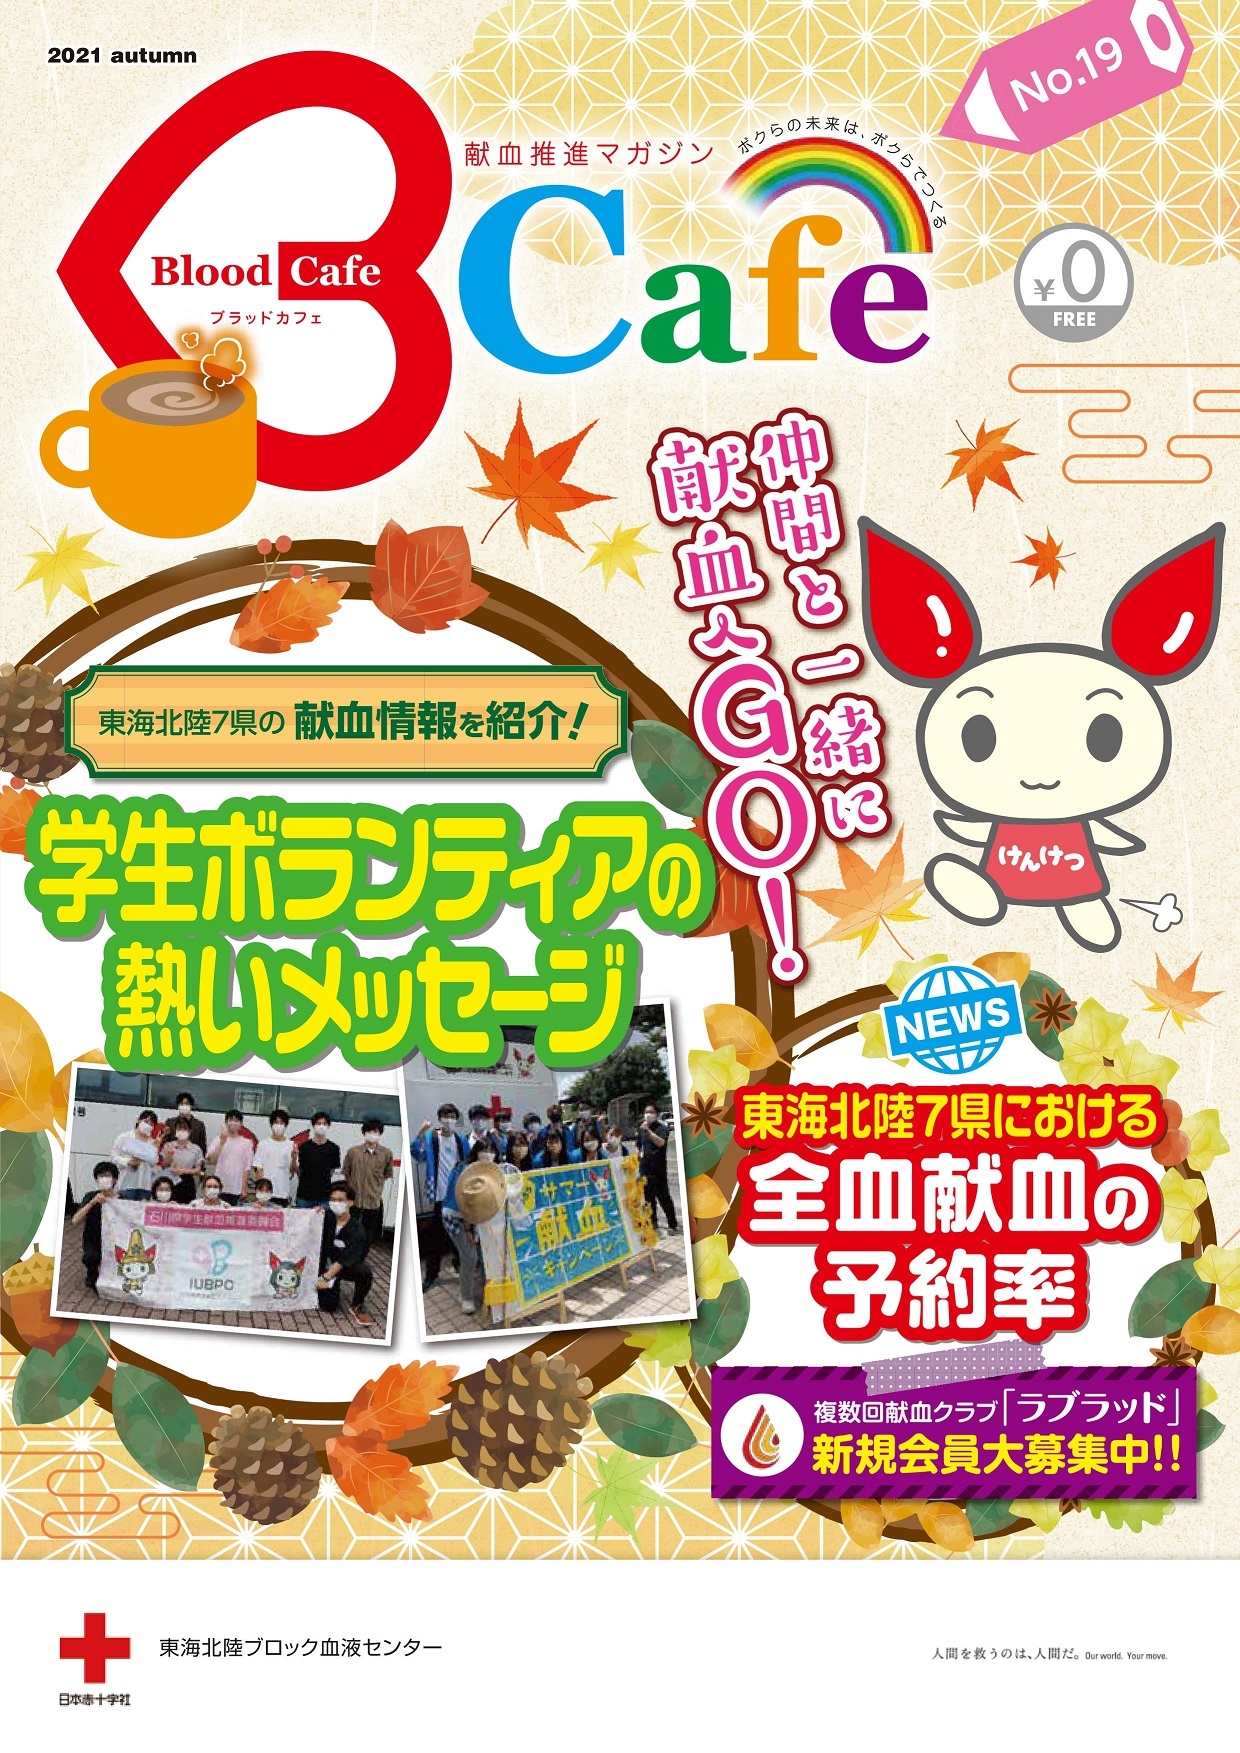 Blood Cafe 第19号のサムネイル